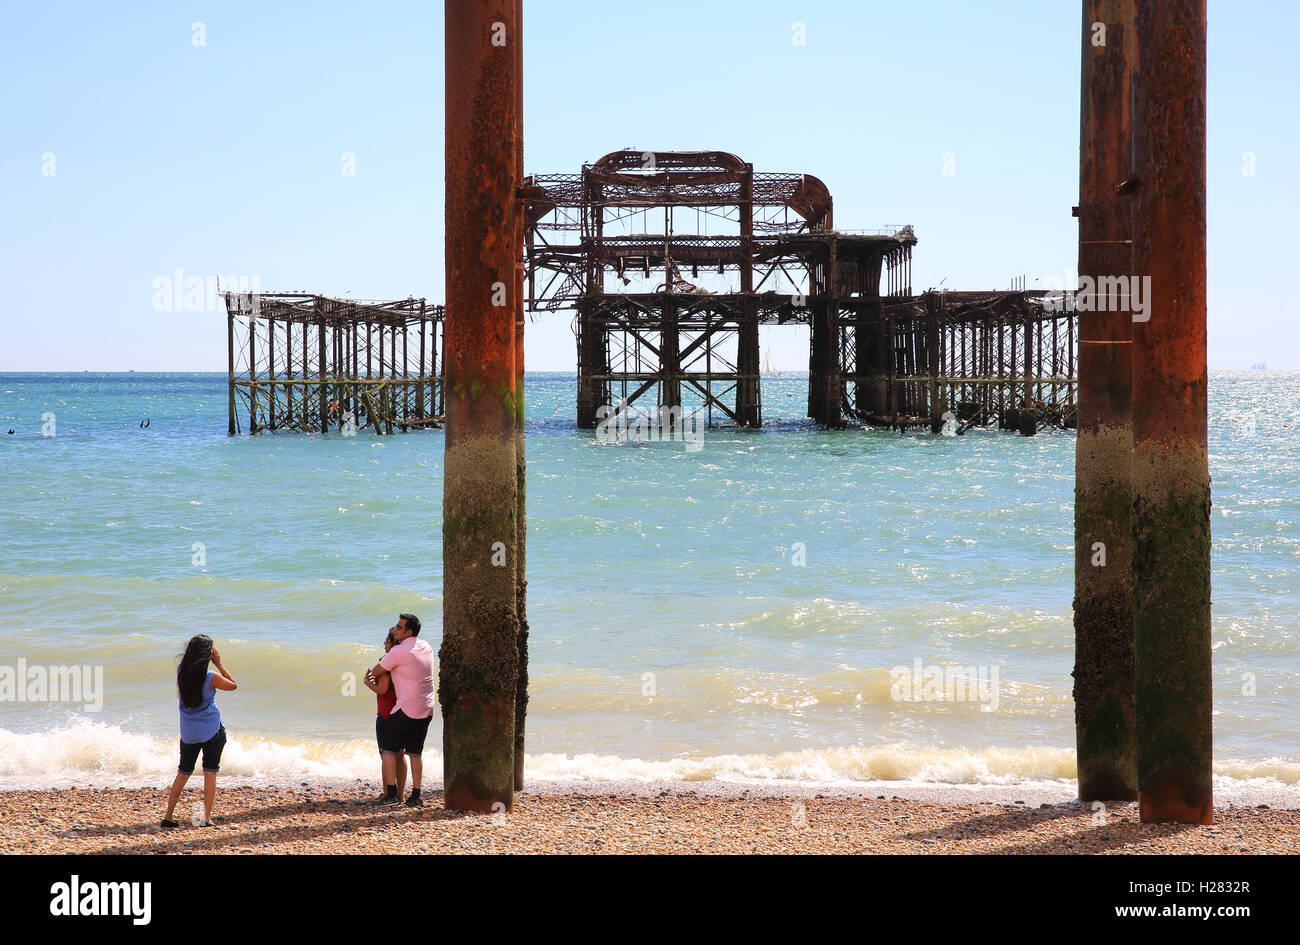 The skeletal remains of the Pavilion and supports of Brighton West Pier, in East Sussex, England, UK Stock Photo